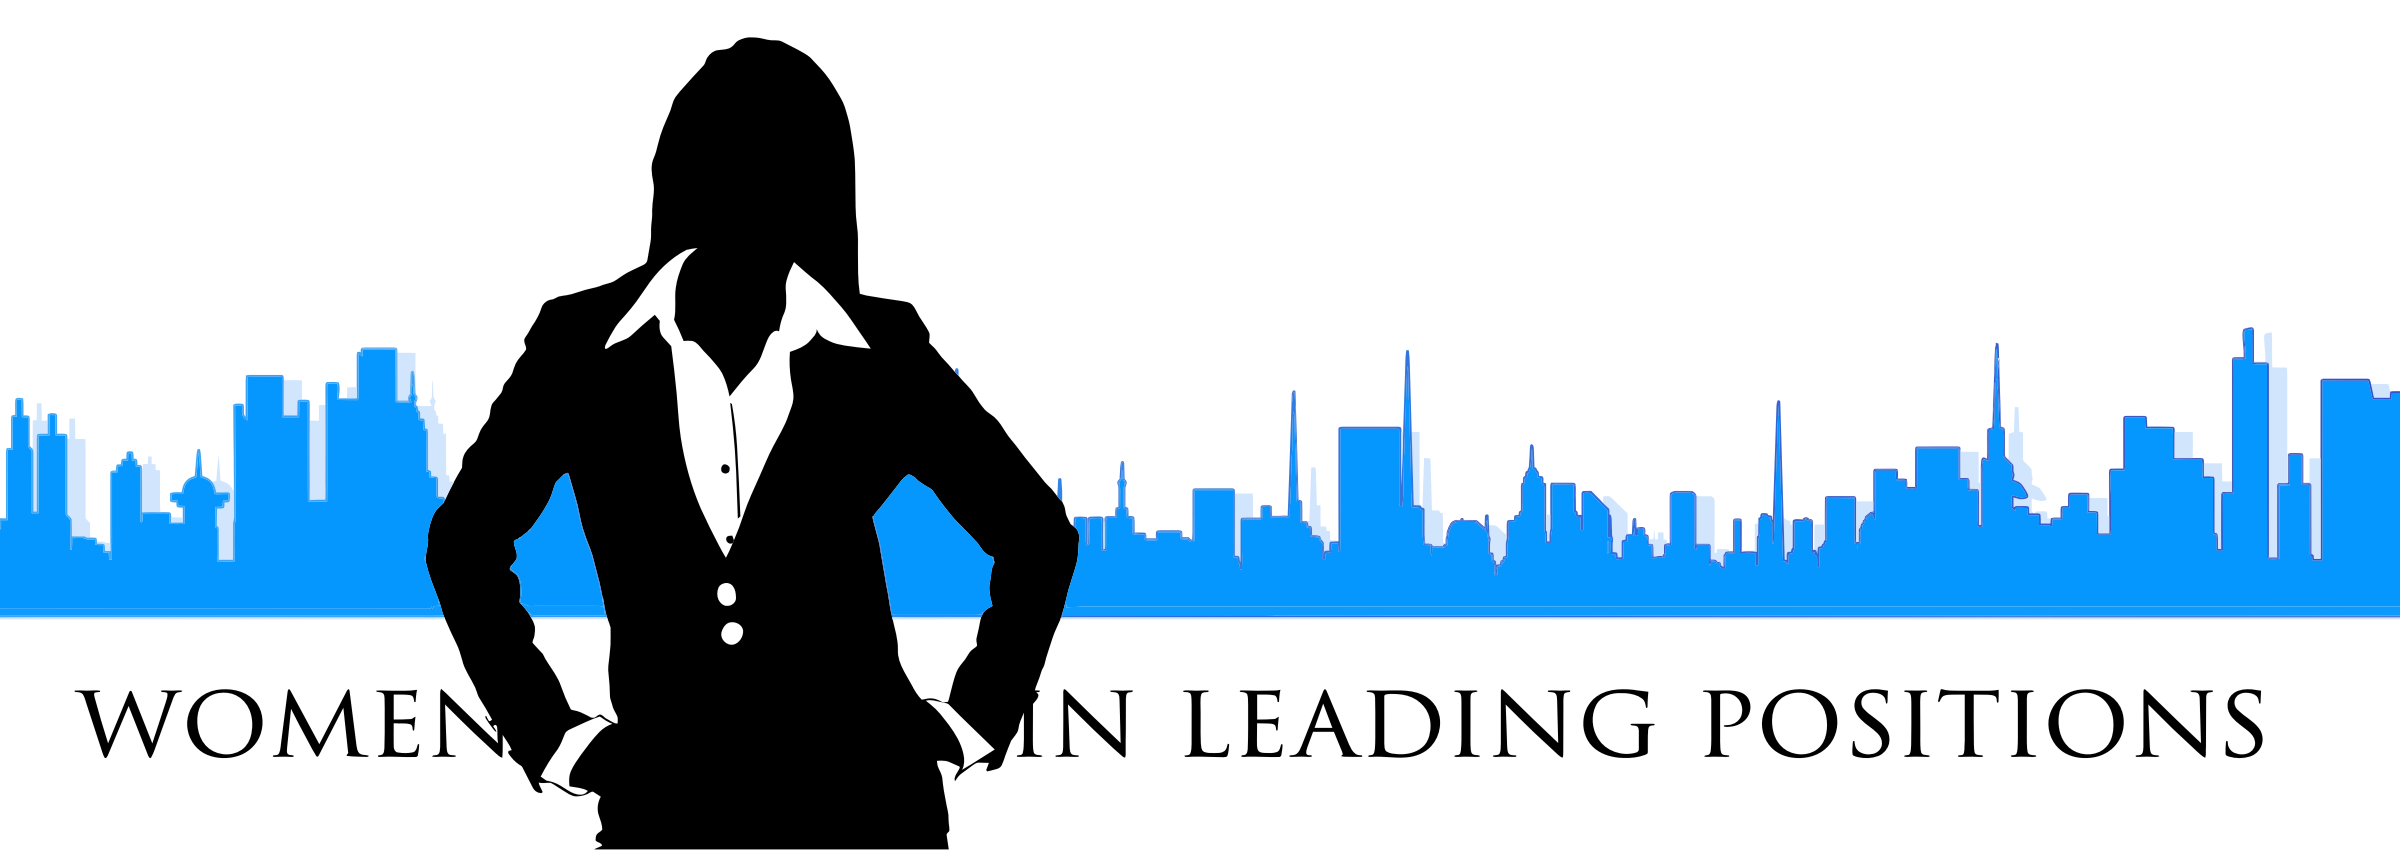 https://openclipart.org/image/2400px/svg_to_png/221307/Businesswoman.png